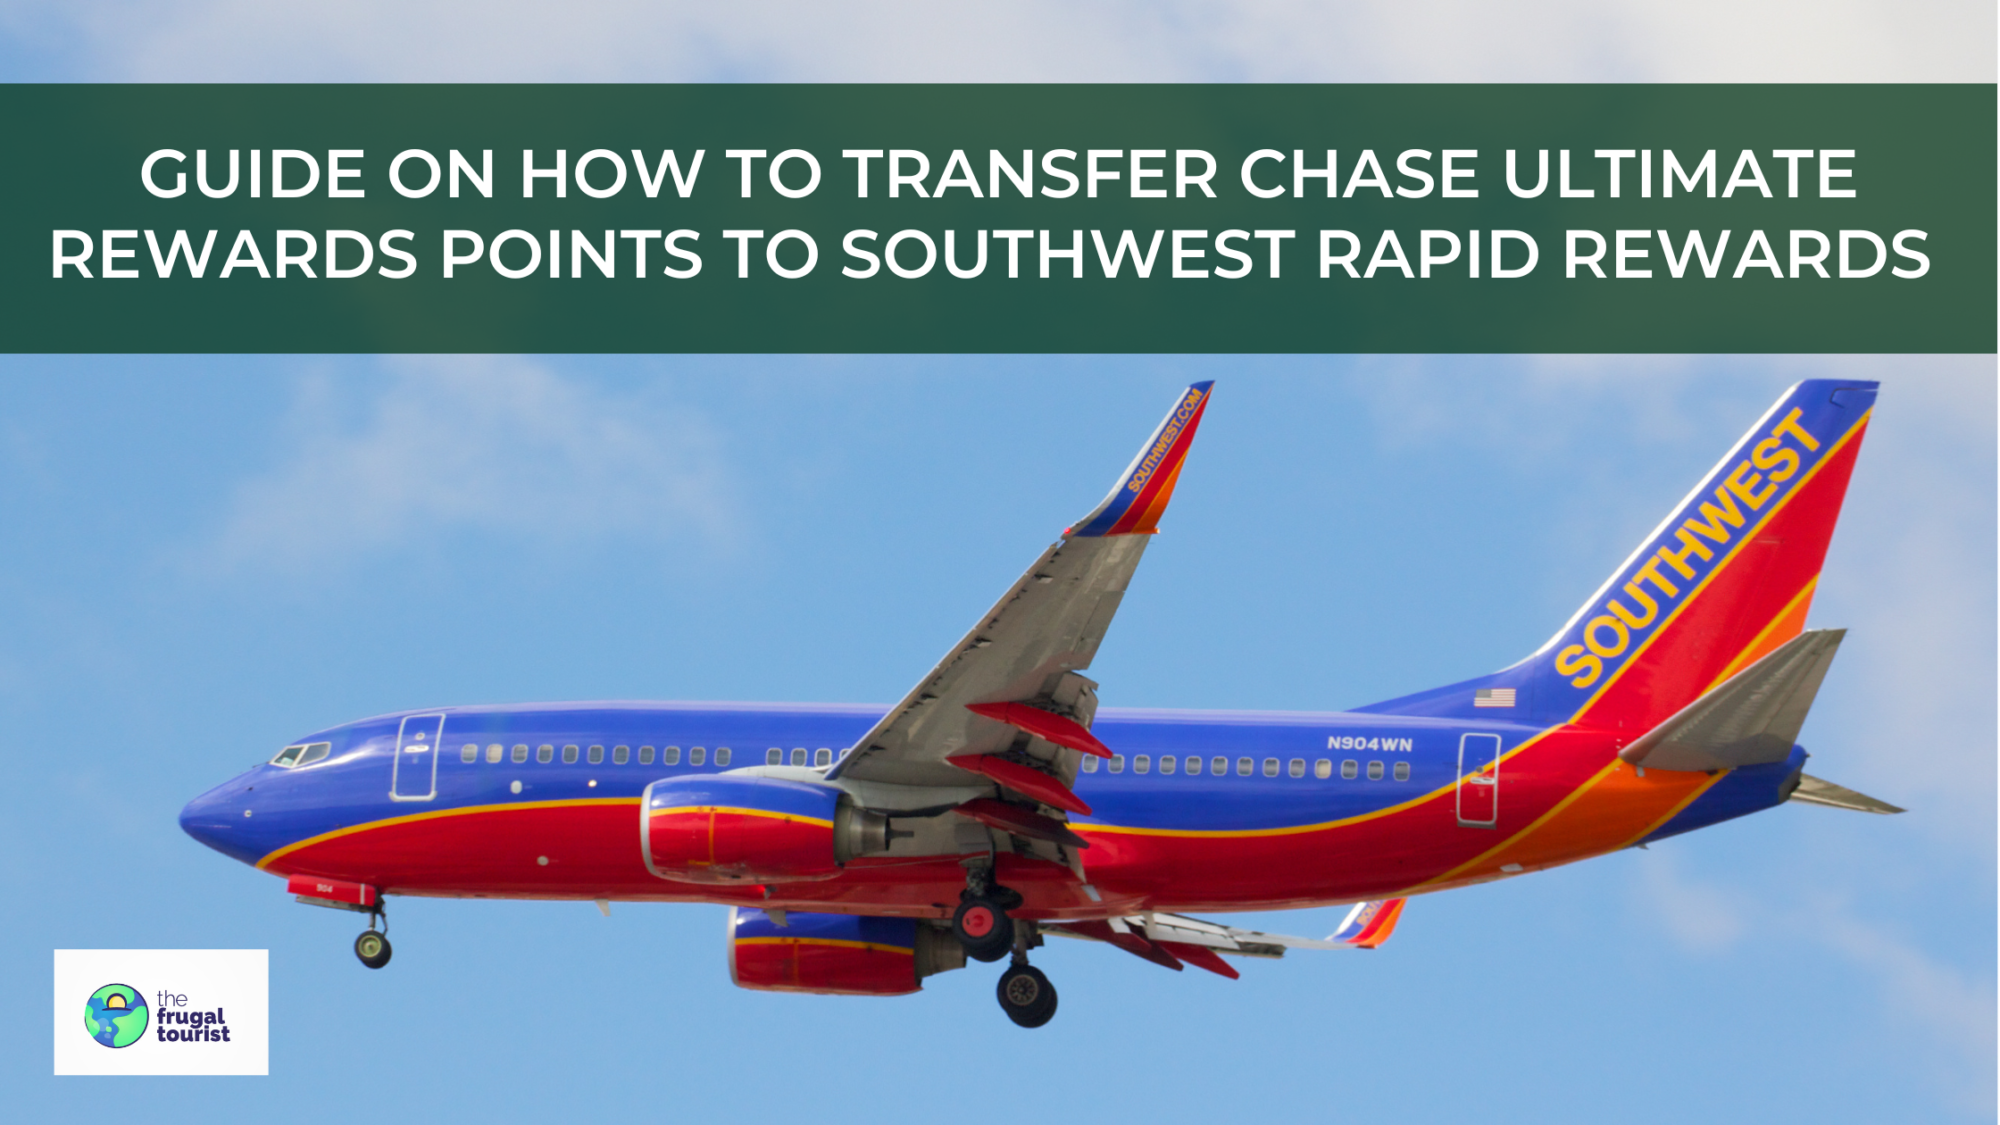 Guide on How to Transfer Chase Ultimate Rewards Points to Southwest Rapid Rewards